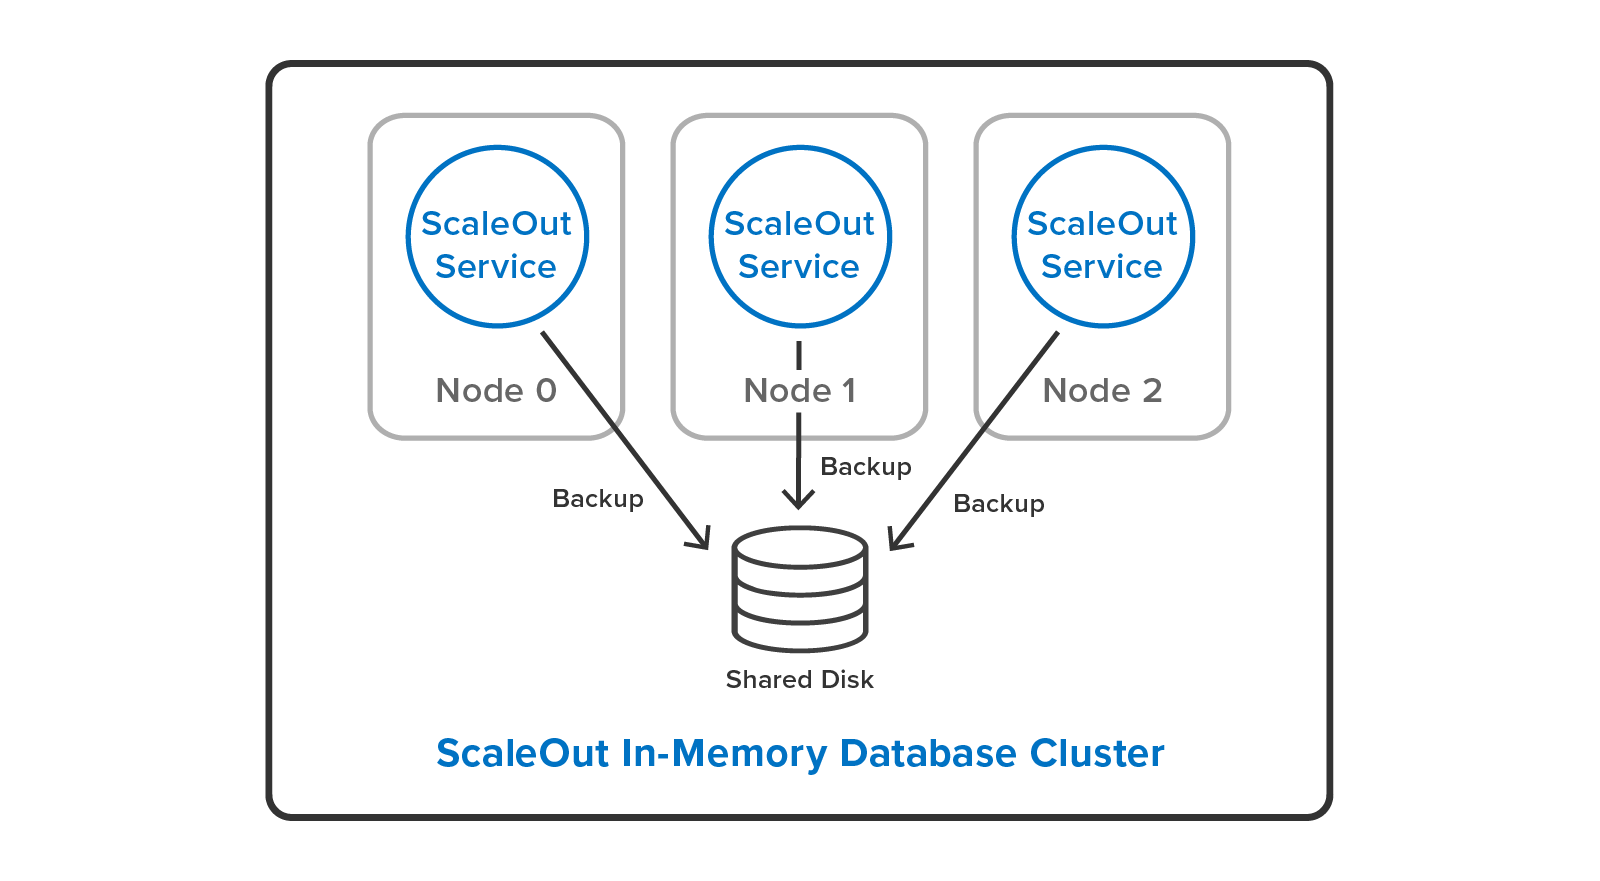 ScaleOut In-Memory Database can backup all servers to a single, shared disk.